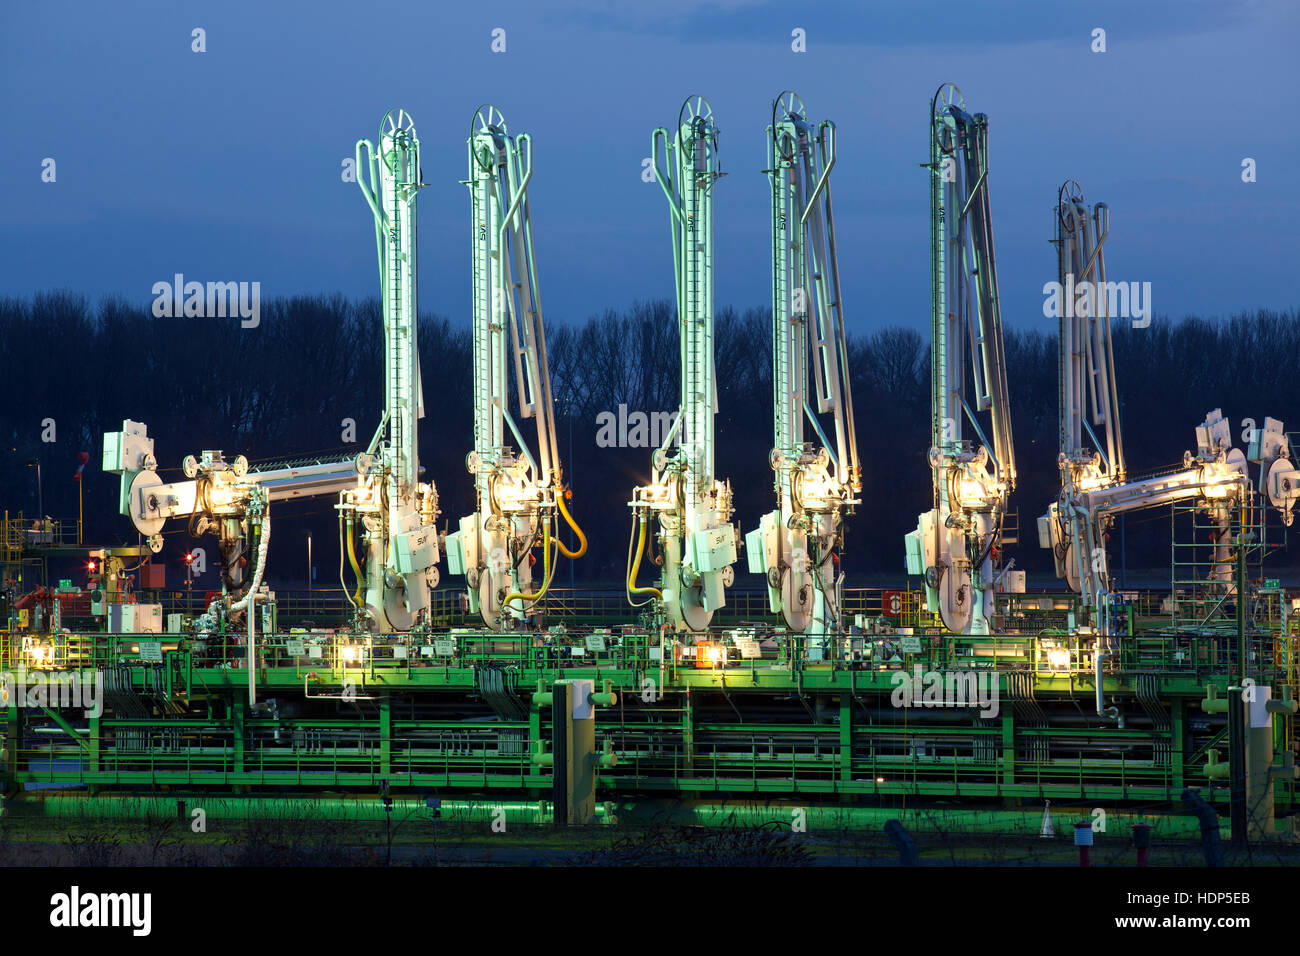 Germany, Cologne, harbor Cologne-Godorf, a loading plant for flammable liquid goods Stock Photo